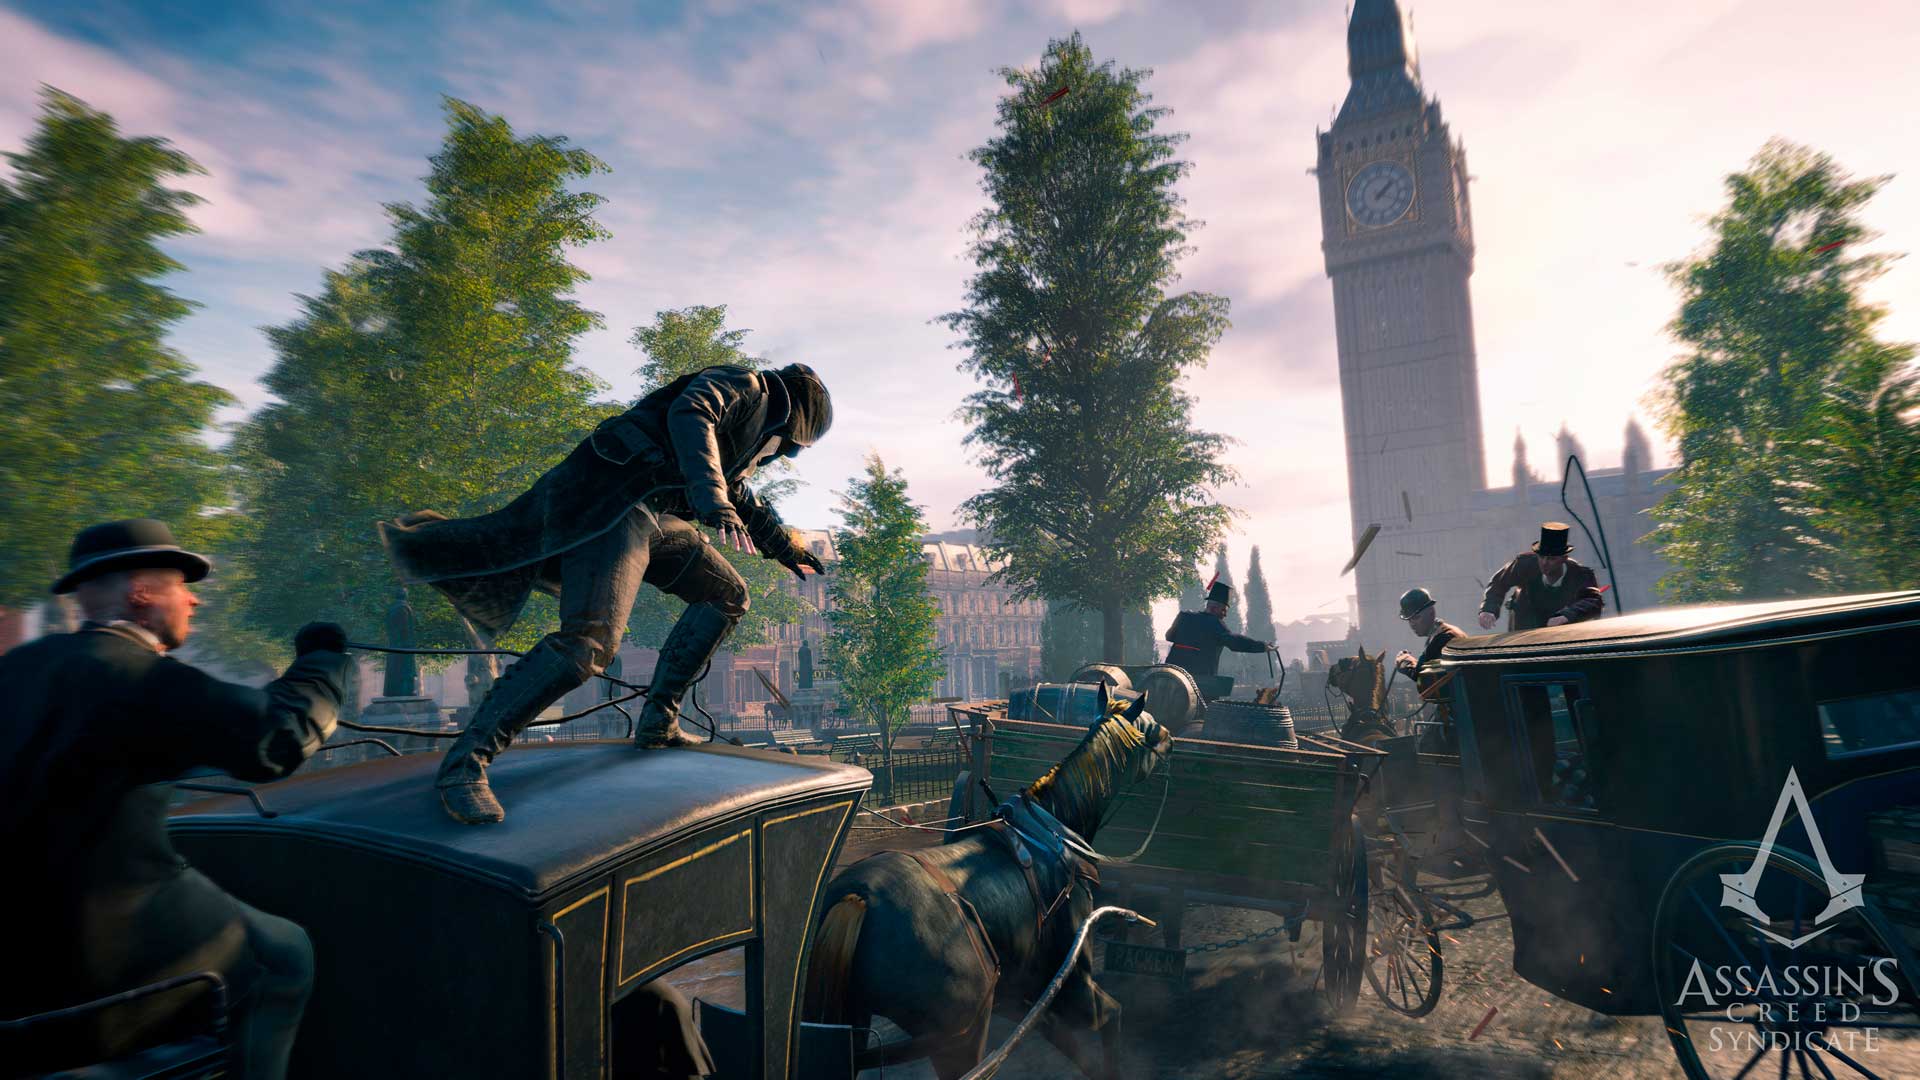 Assassin’s Creed Syndicate presented by Ubisoft!